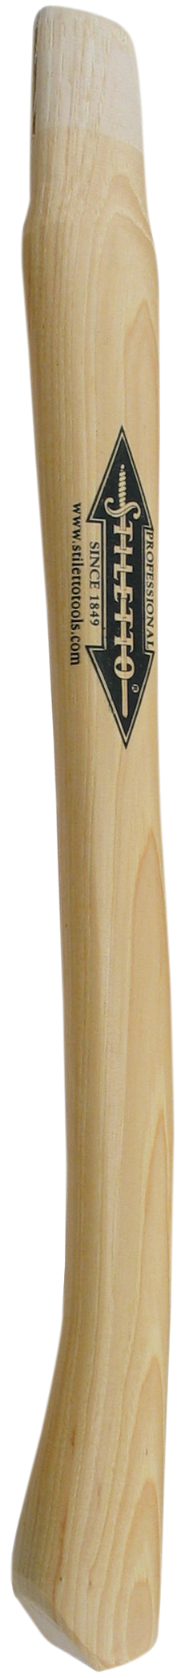 STILETTO 18” Curve Hickory Replacement Handle For 12/14oz